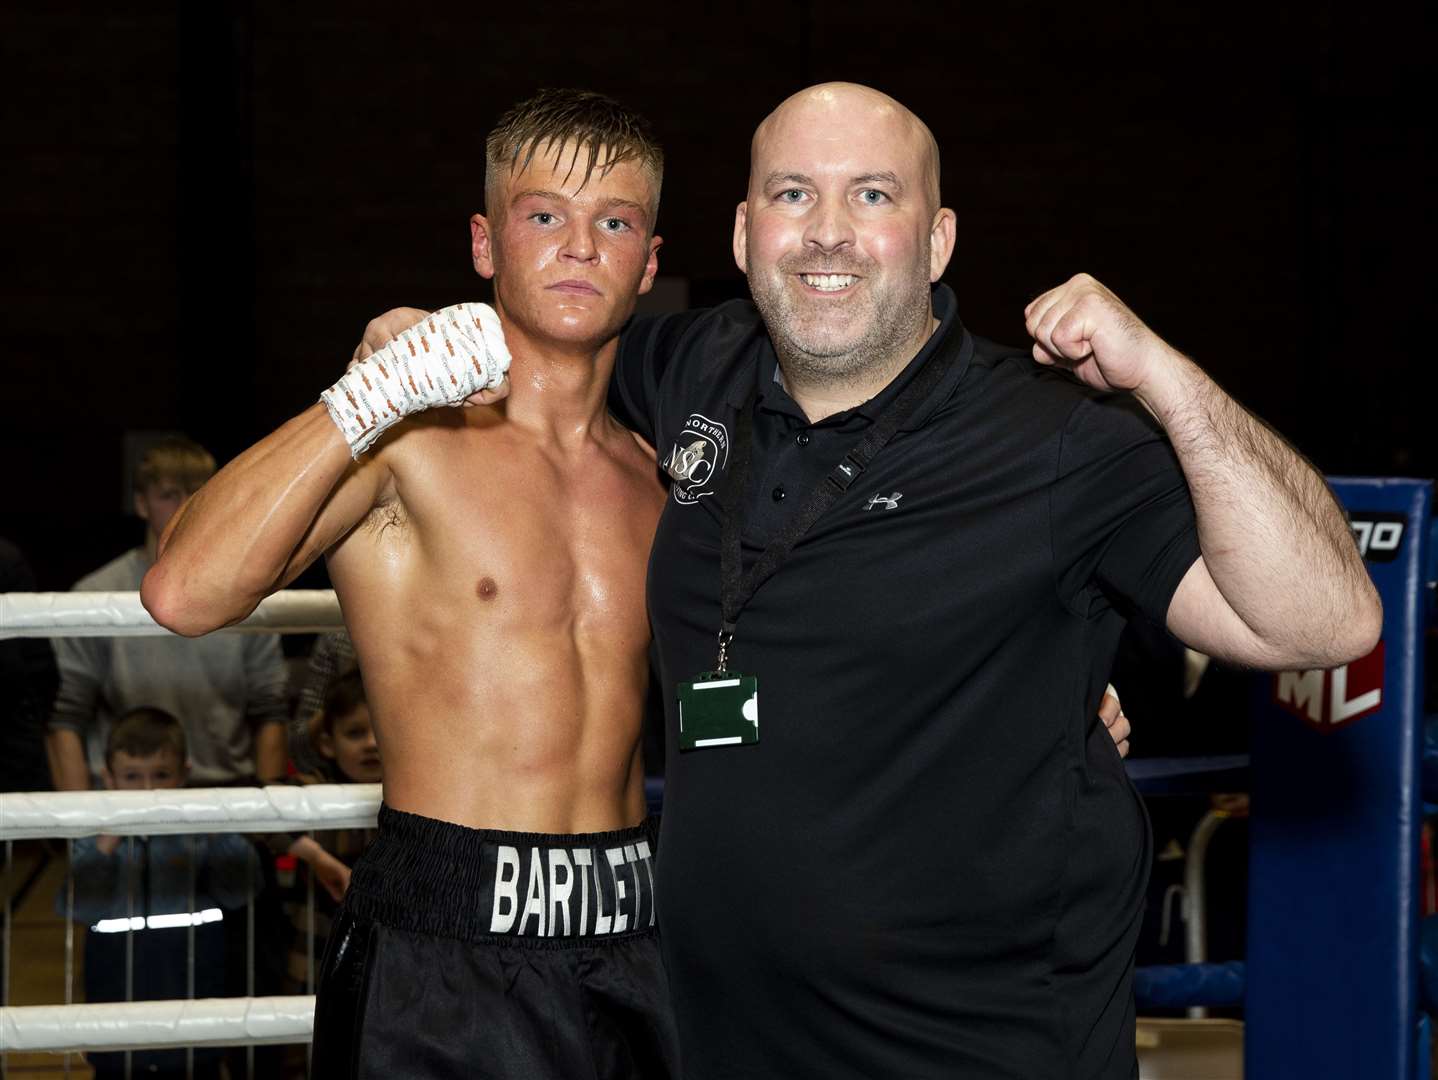 Strathpeffer's Ben Bartlett went 3-0 as a professional with a hometown win over Rustem Fatkhullin in Inverness.